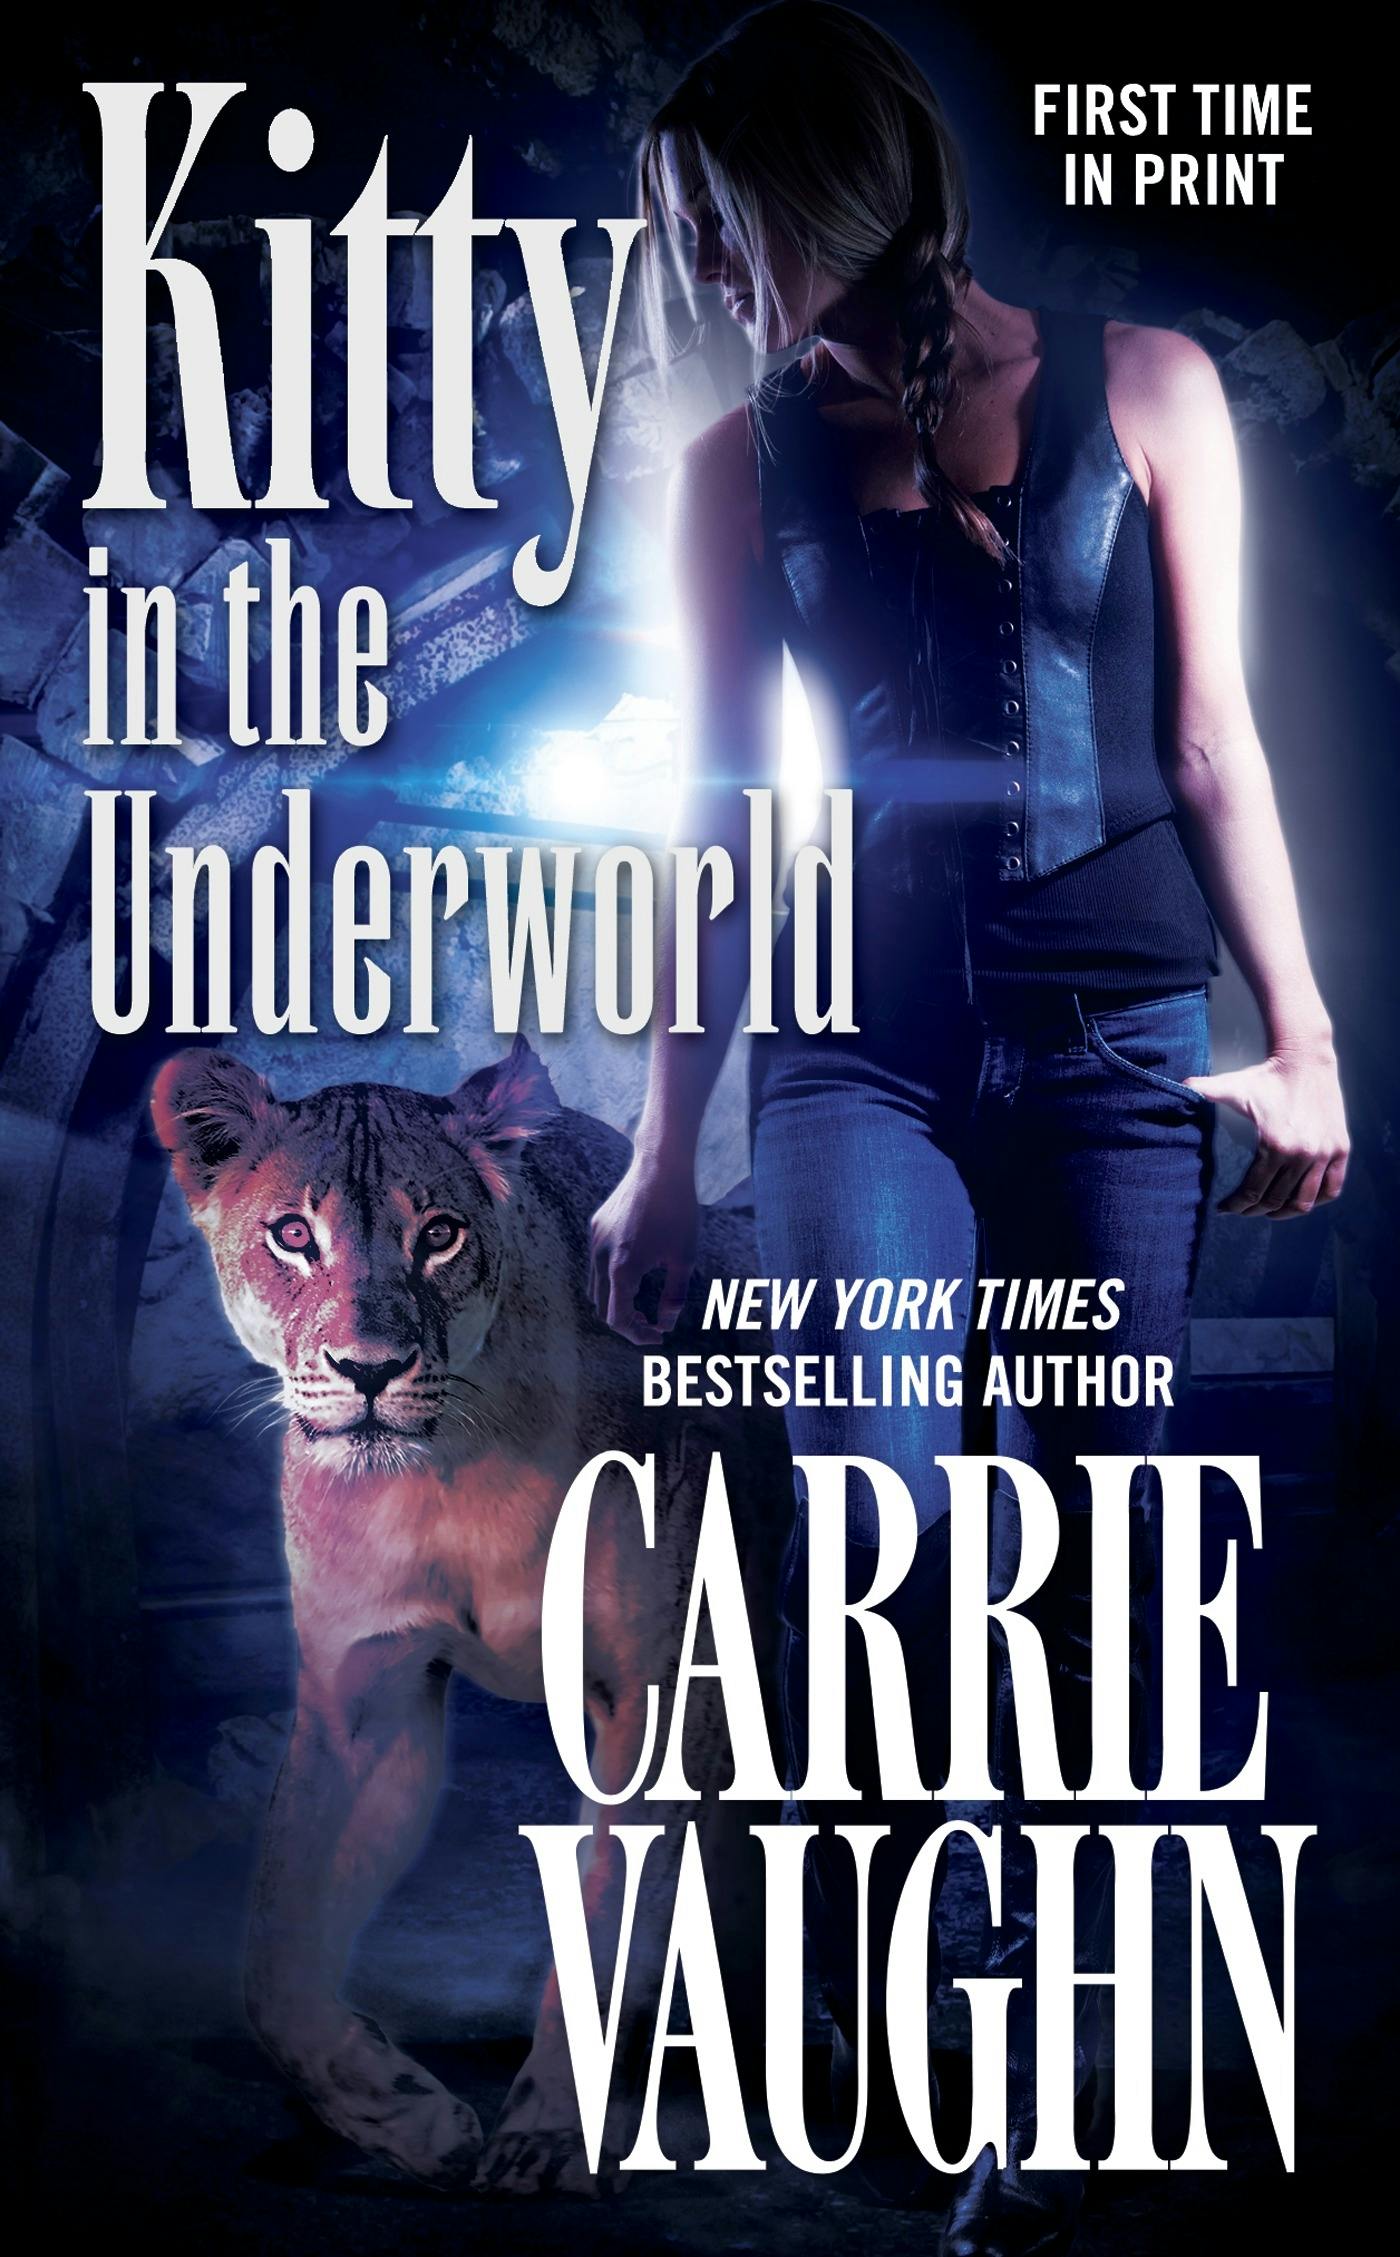 Cover for the book titled as: Kitty in the Underworld